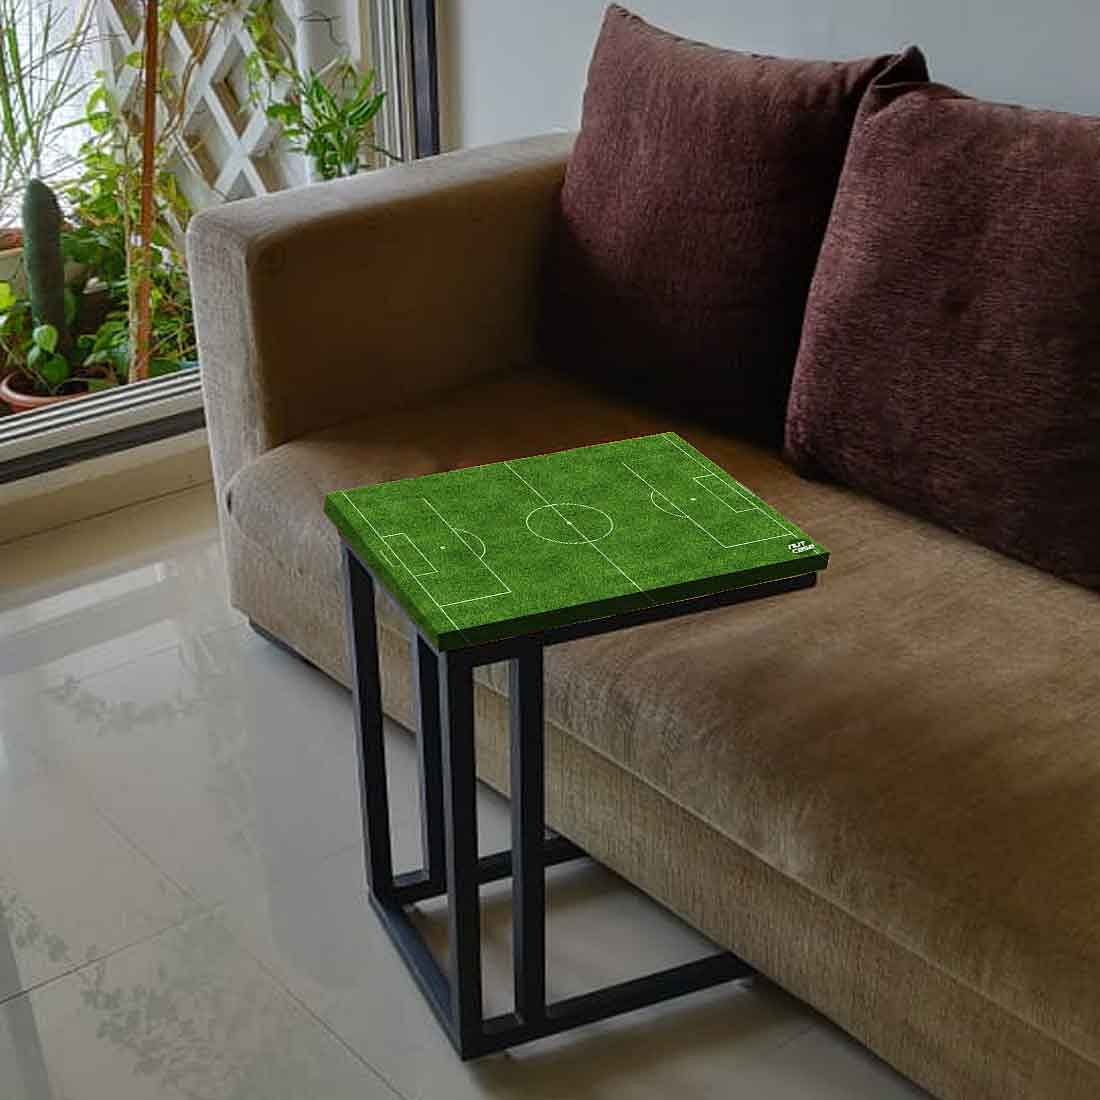 Small C Shaped Table For Sofa - Football Pitch Nutcase